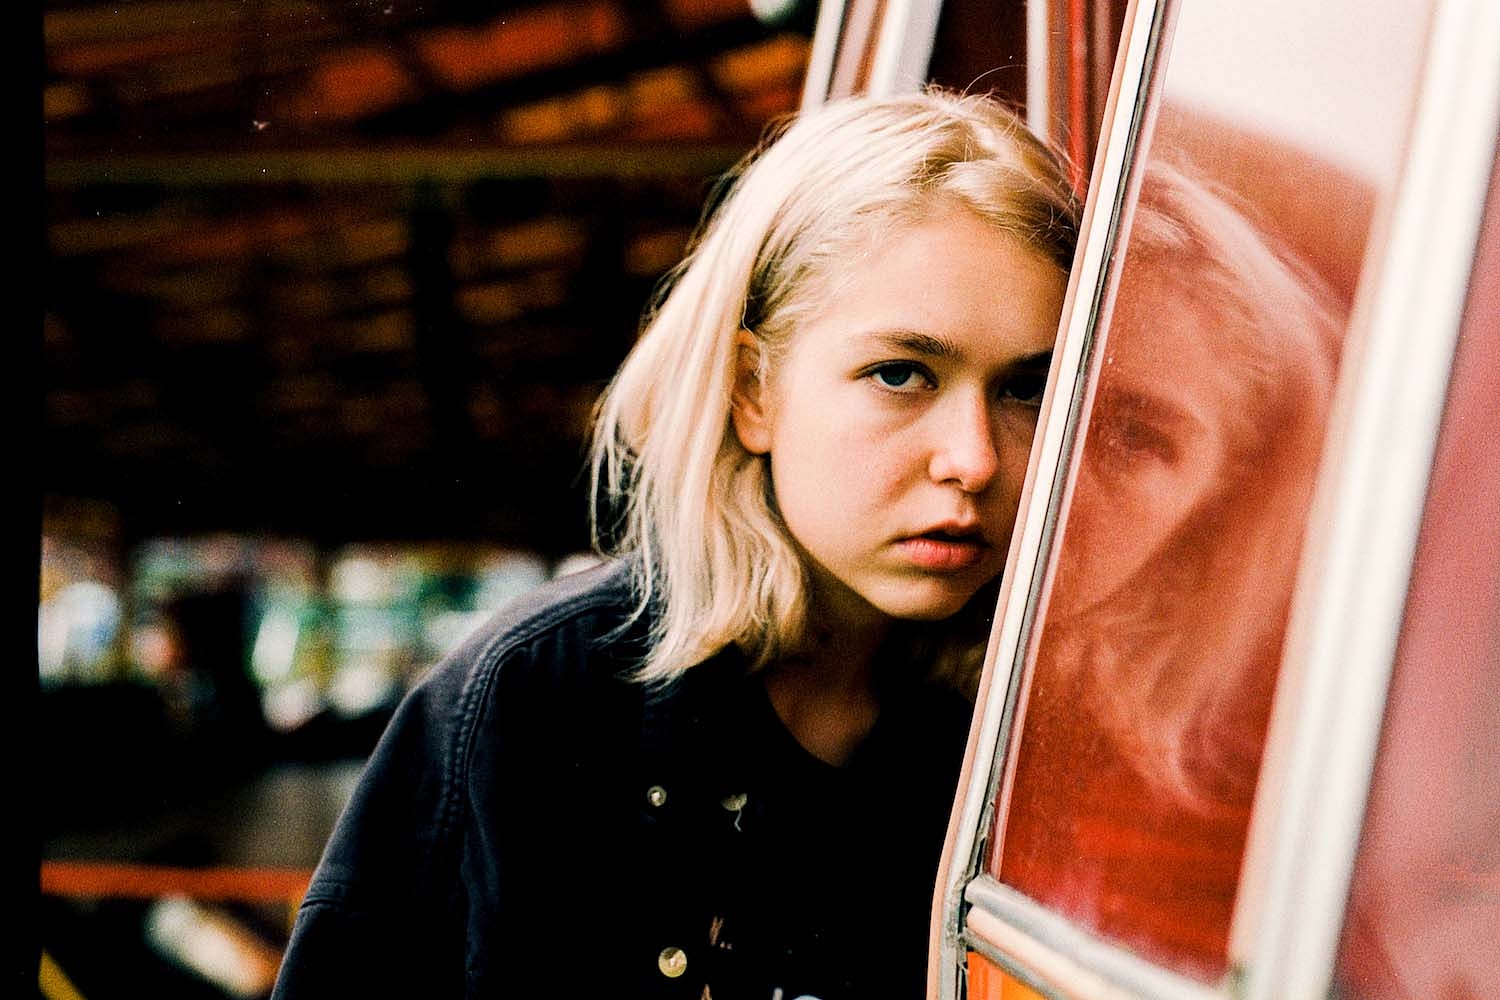 Snail Mail announces US tour dates including huge Madison Square Garden Interpol support